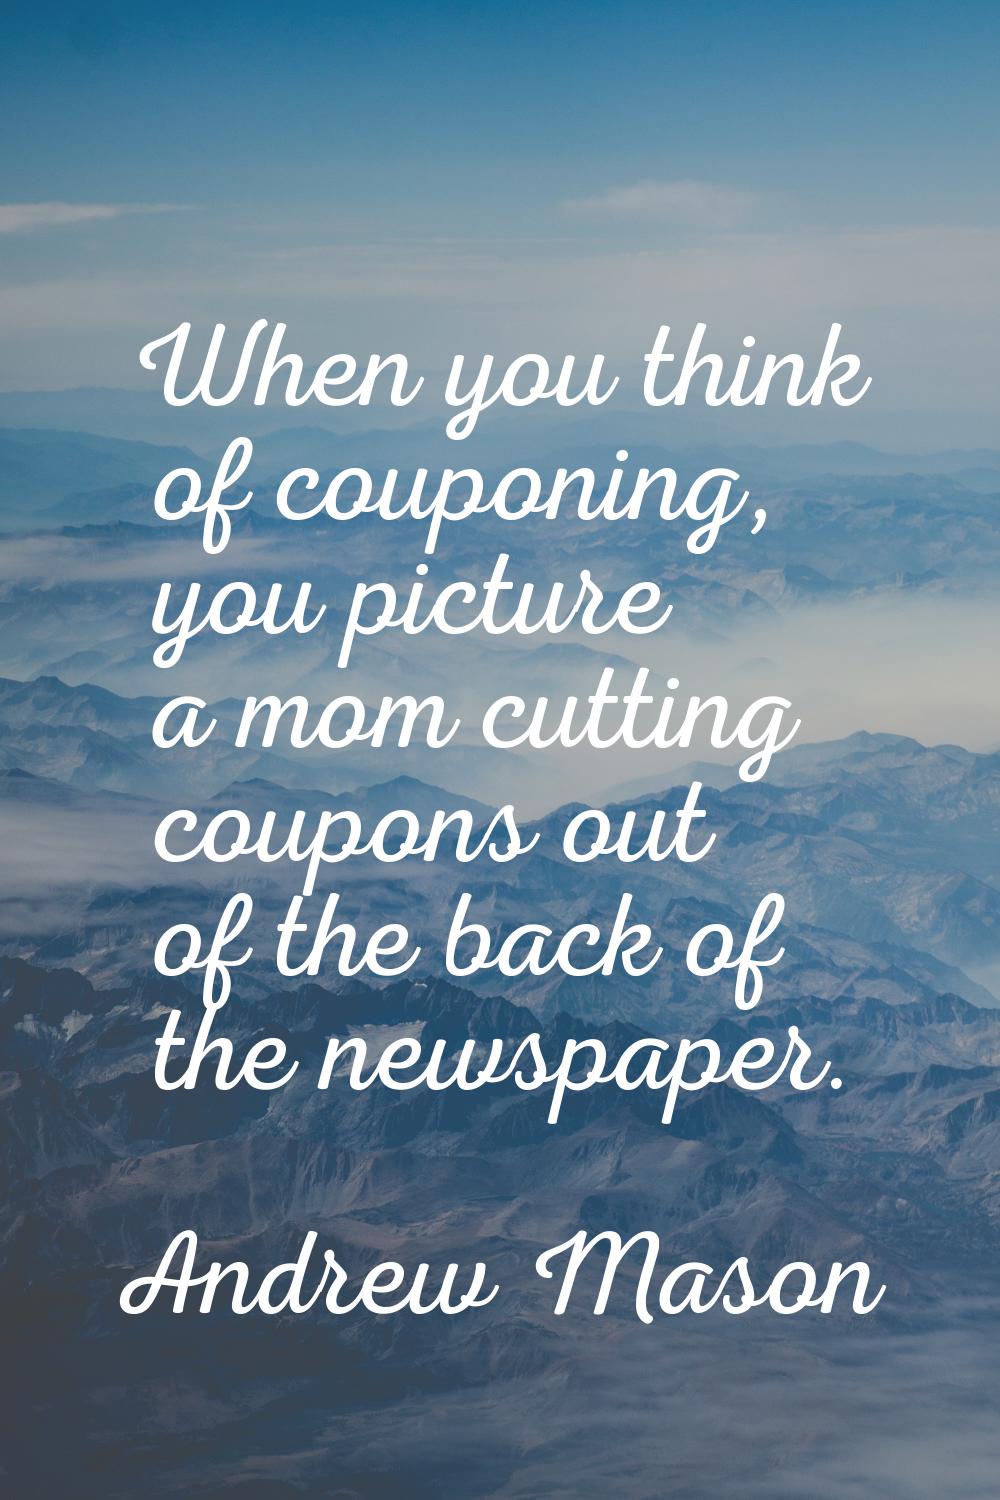 When you think of couponing, you picture a mom cutting coupons out of the back of the newspaper.